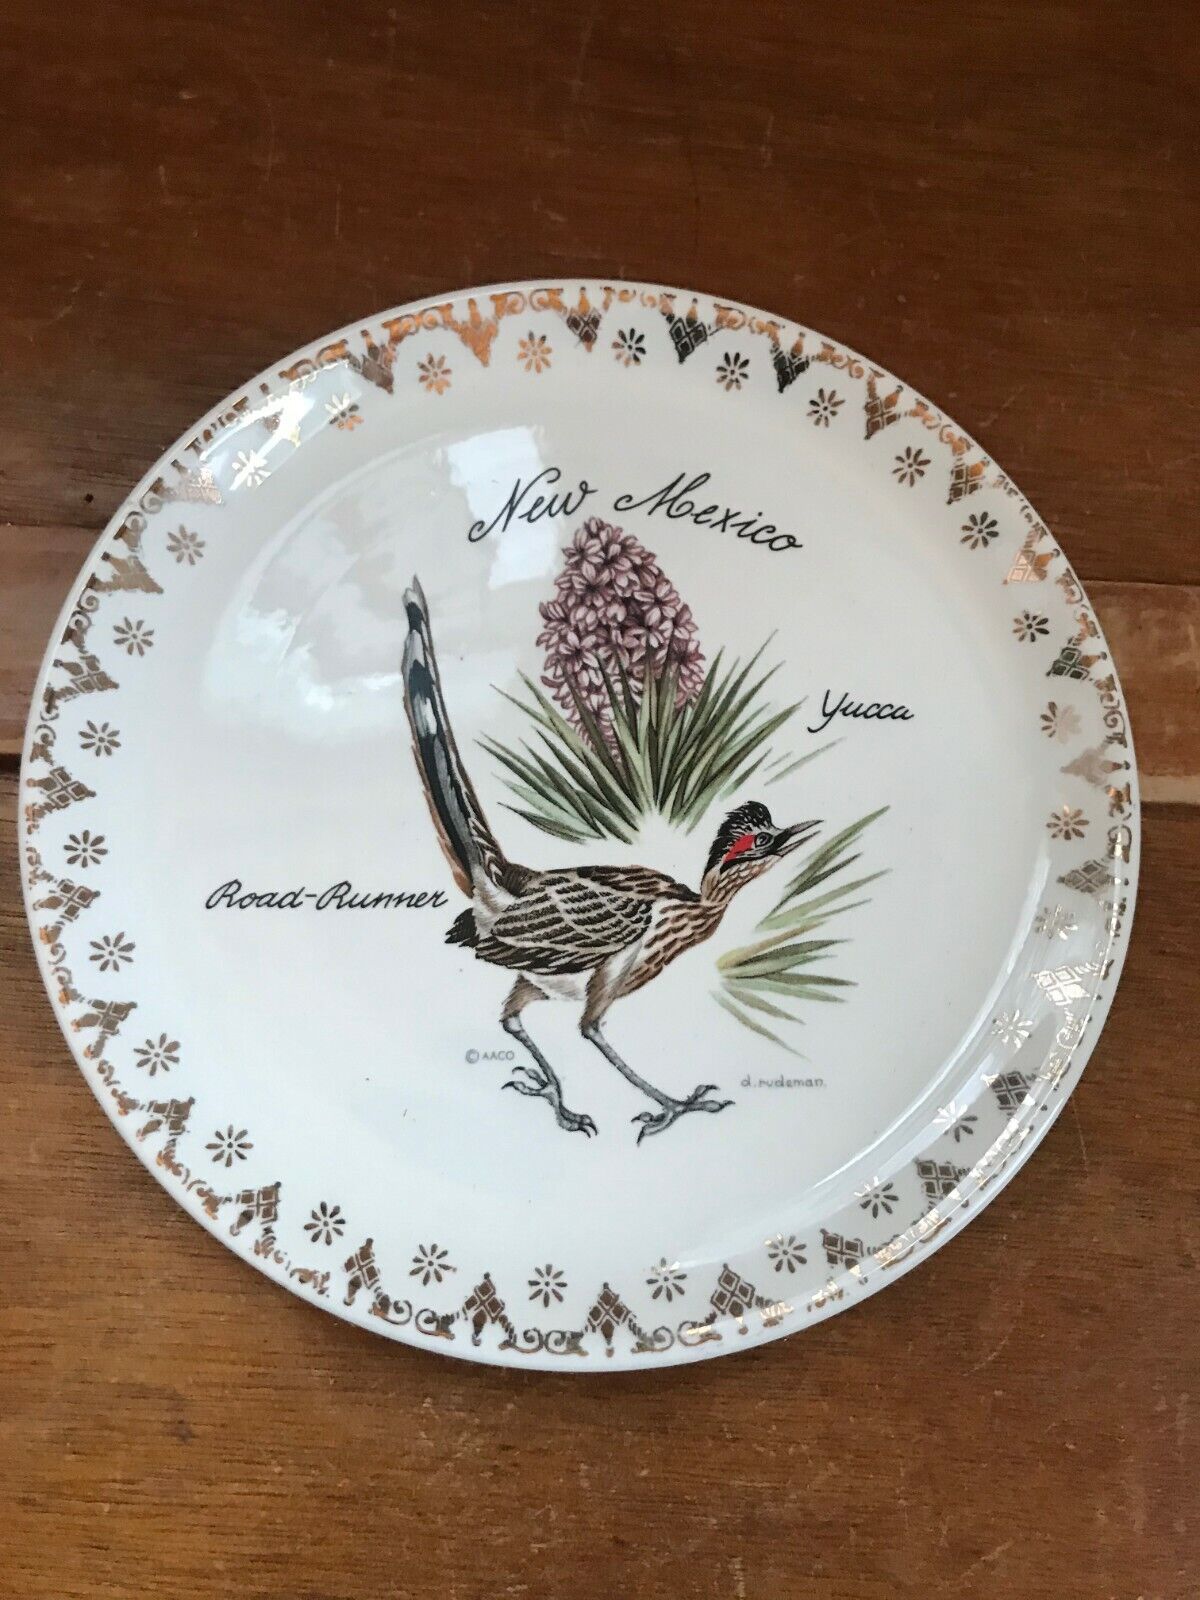 Vintage Small New Mexico Road Runner Yucca Ceramic Travel Souvenir Plate W Gilt